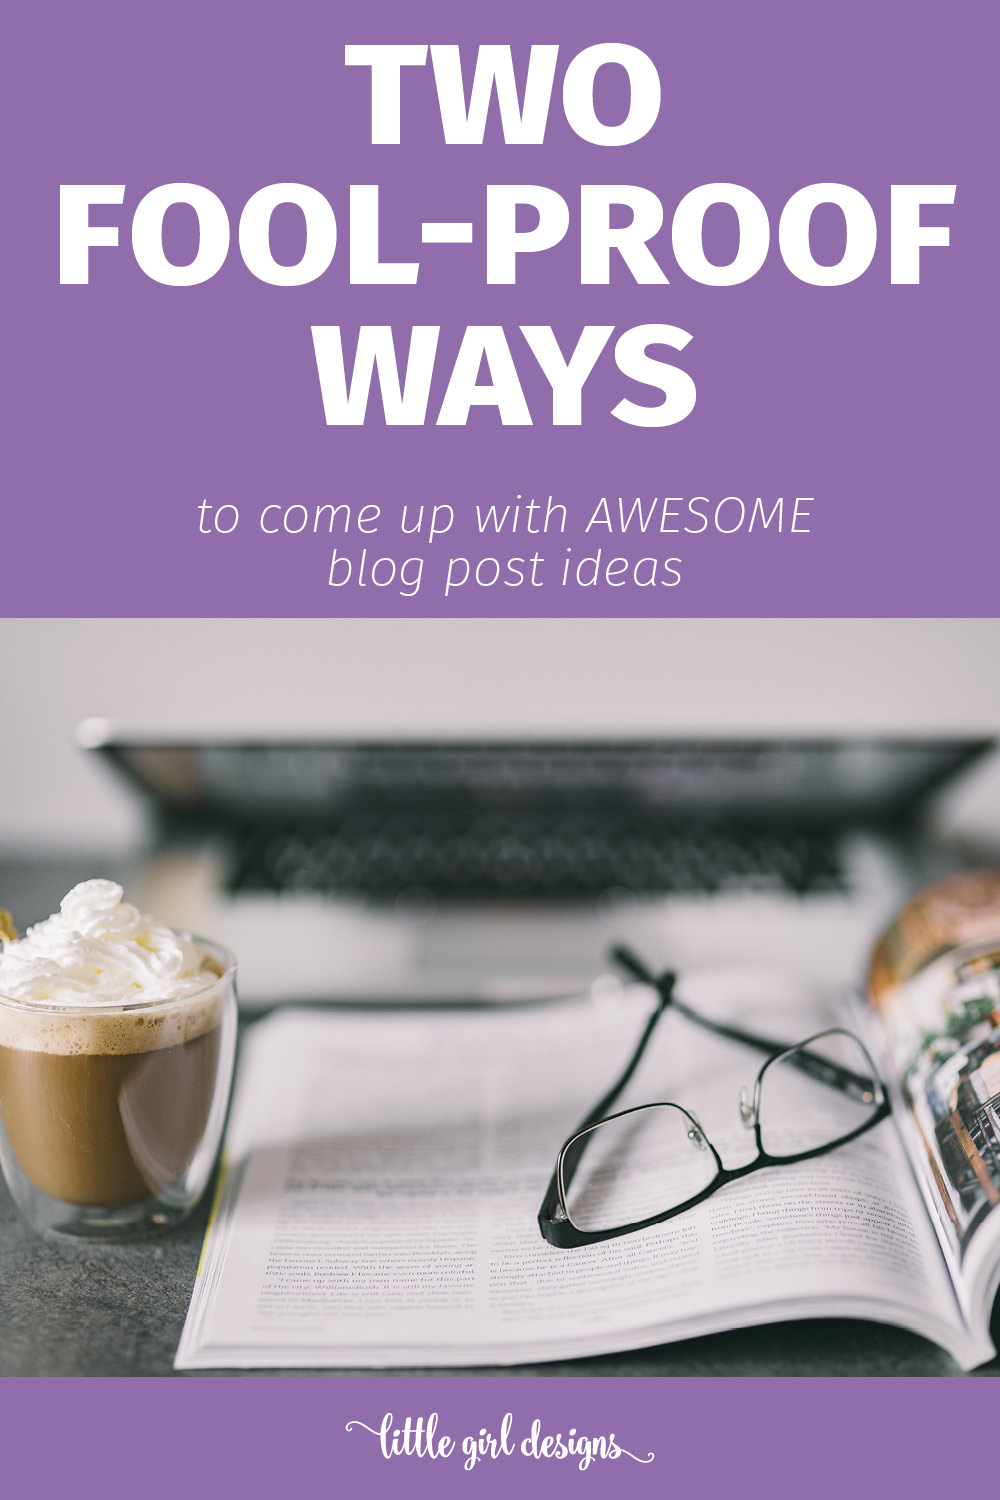 How to Come Up With Blog Post Ideas